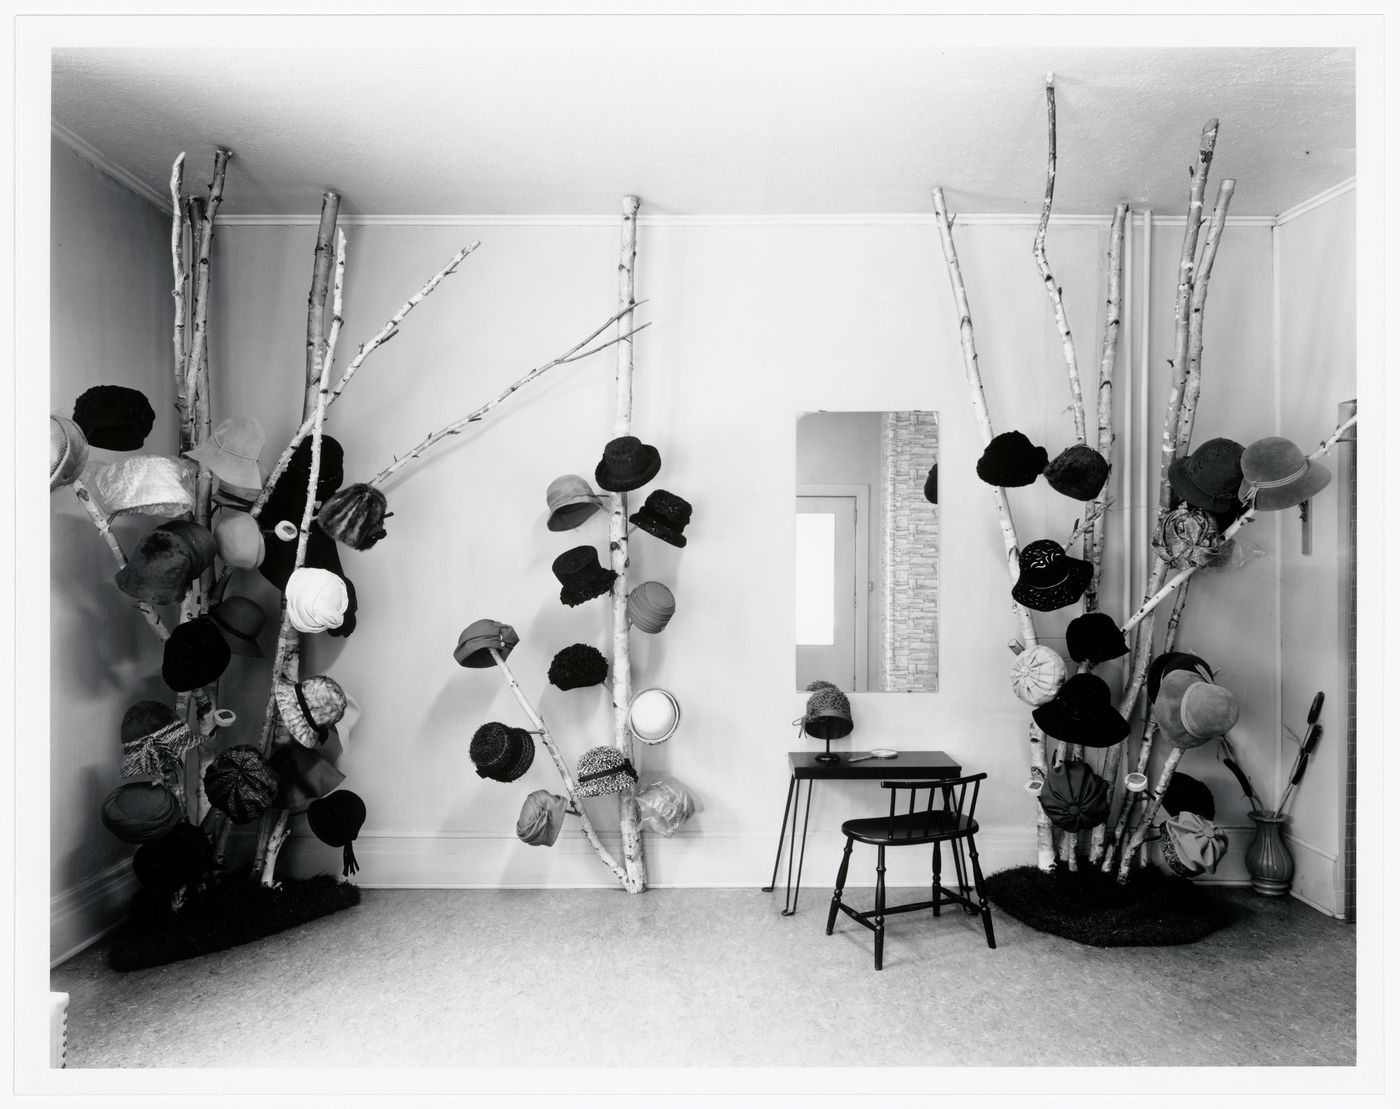 Hat Trees in a Hat Store (printed on mat): hats hung on branches, tree-trunks, interior